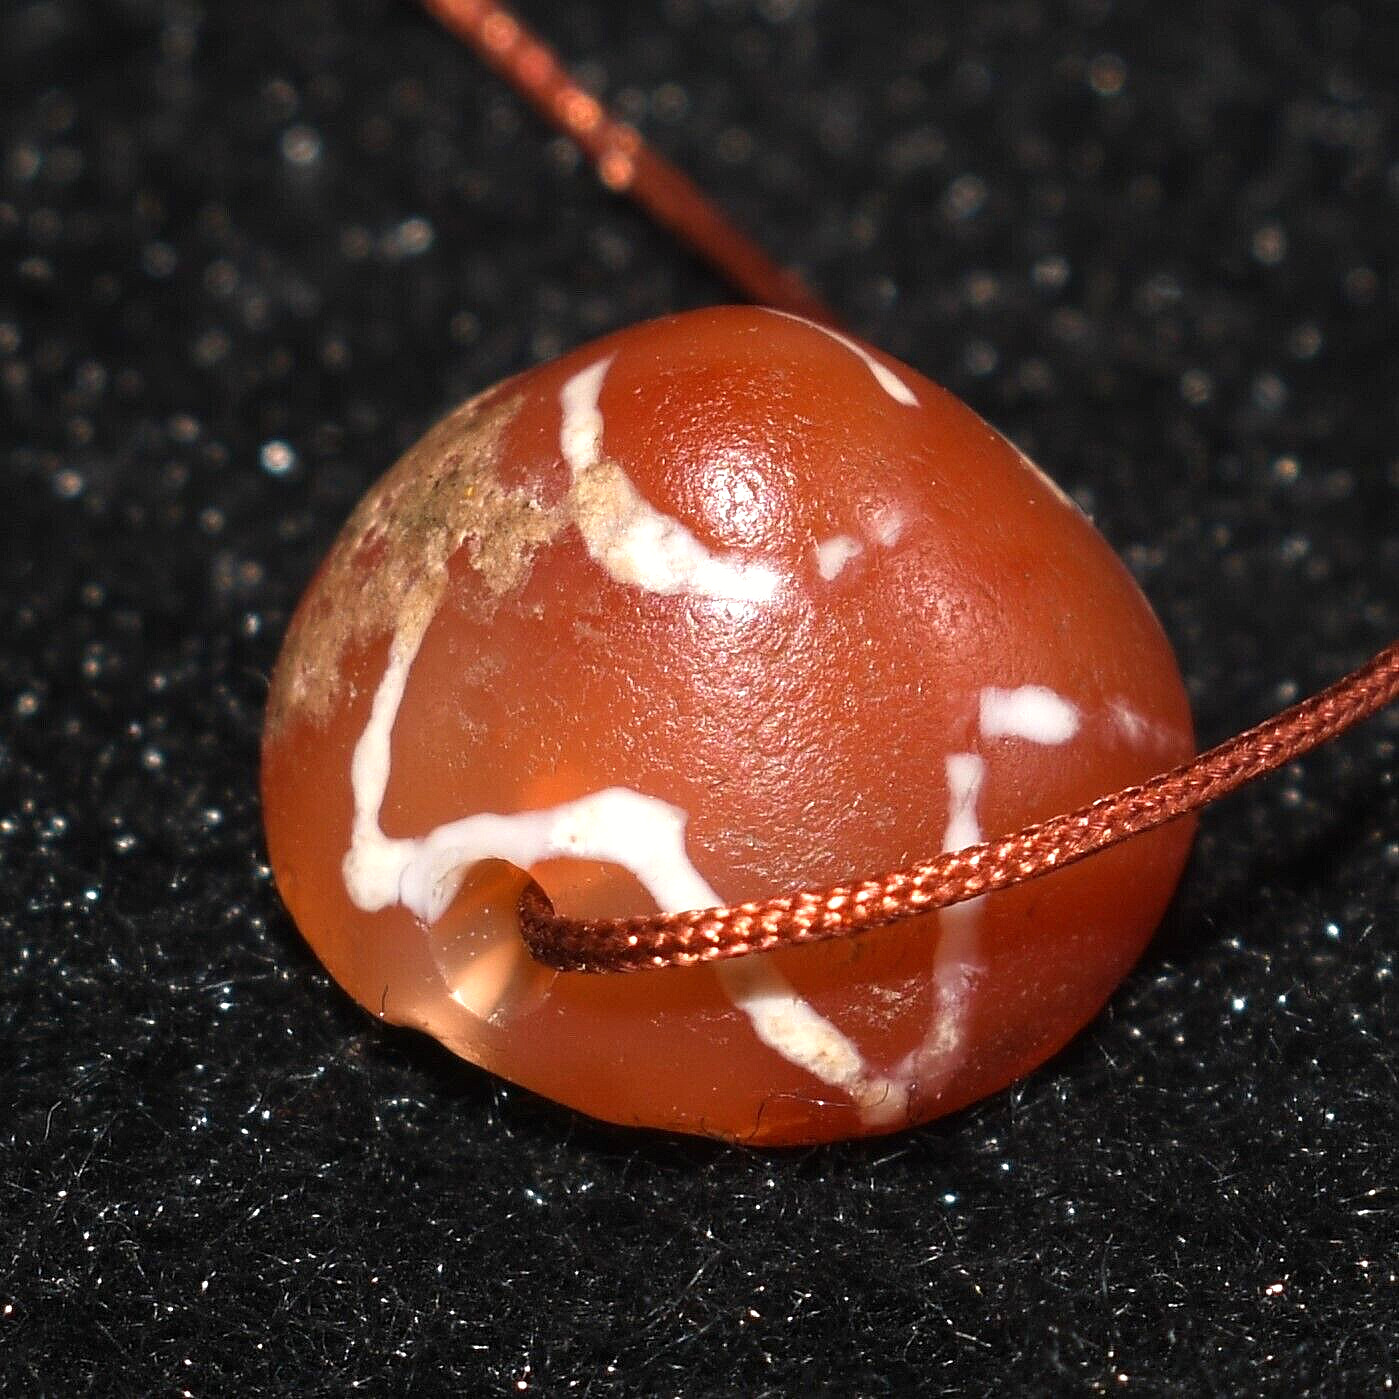 Ancient Very Old Etched Carnelian Bead with Rare Pattern over 2000 Years Old